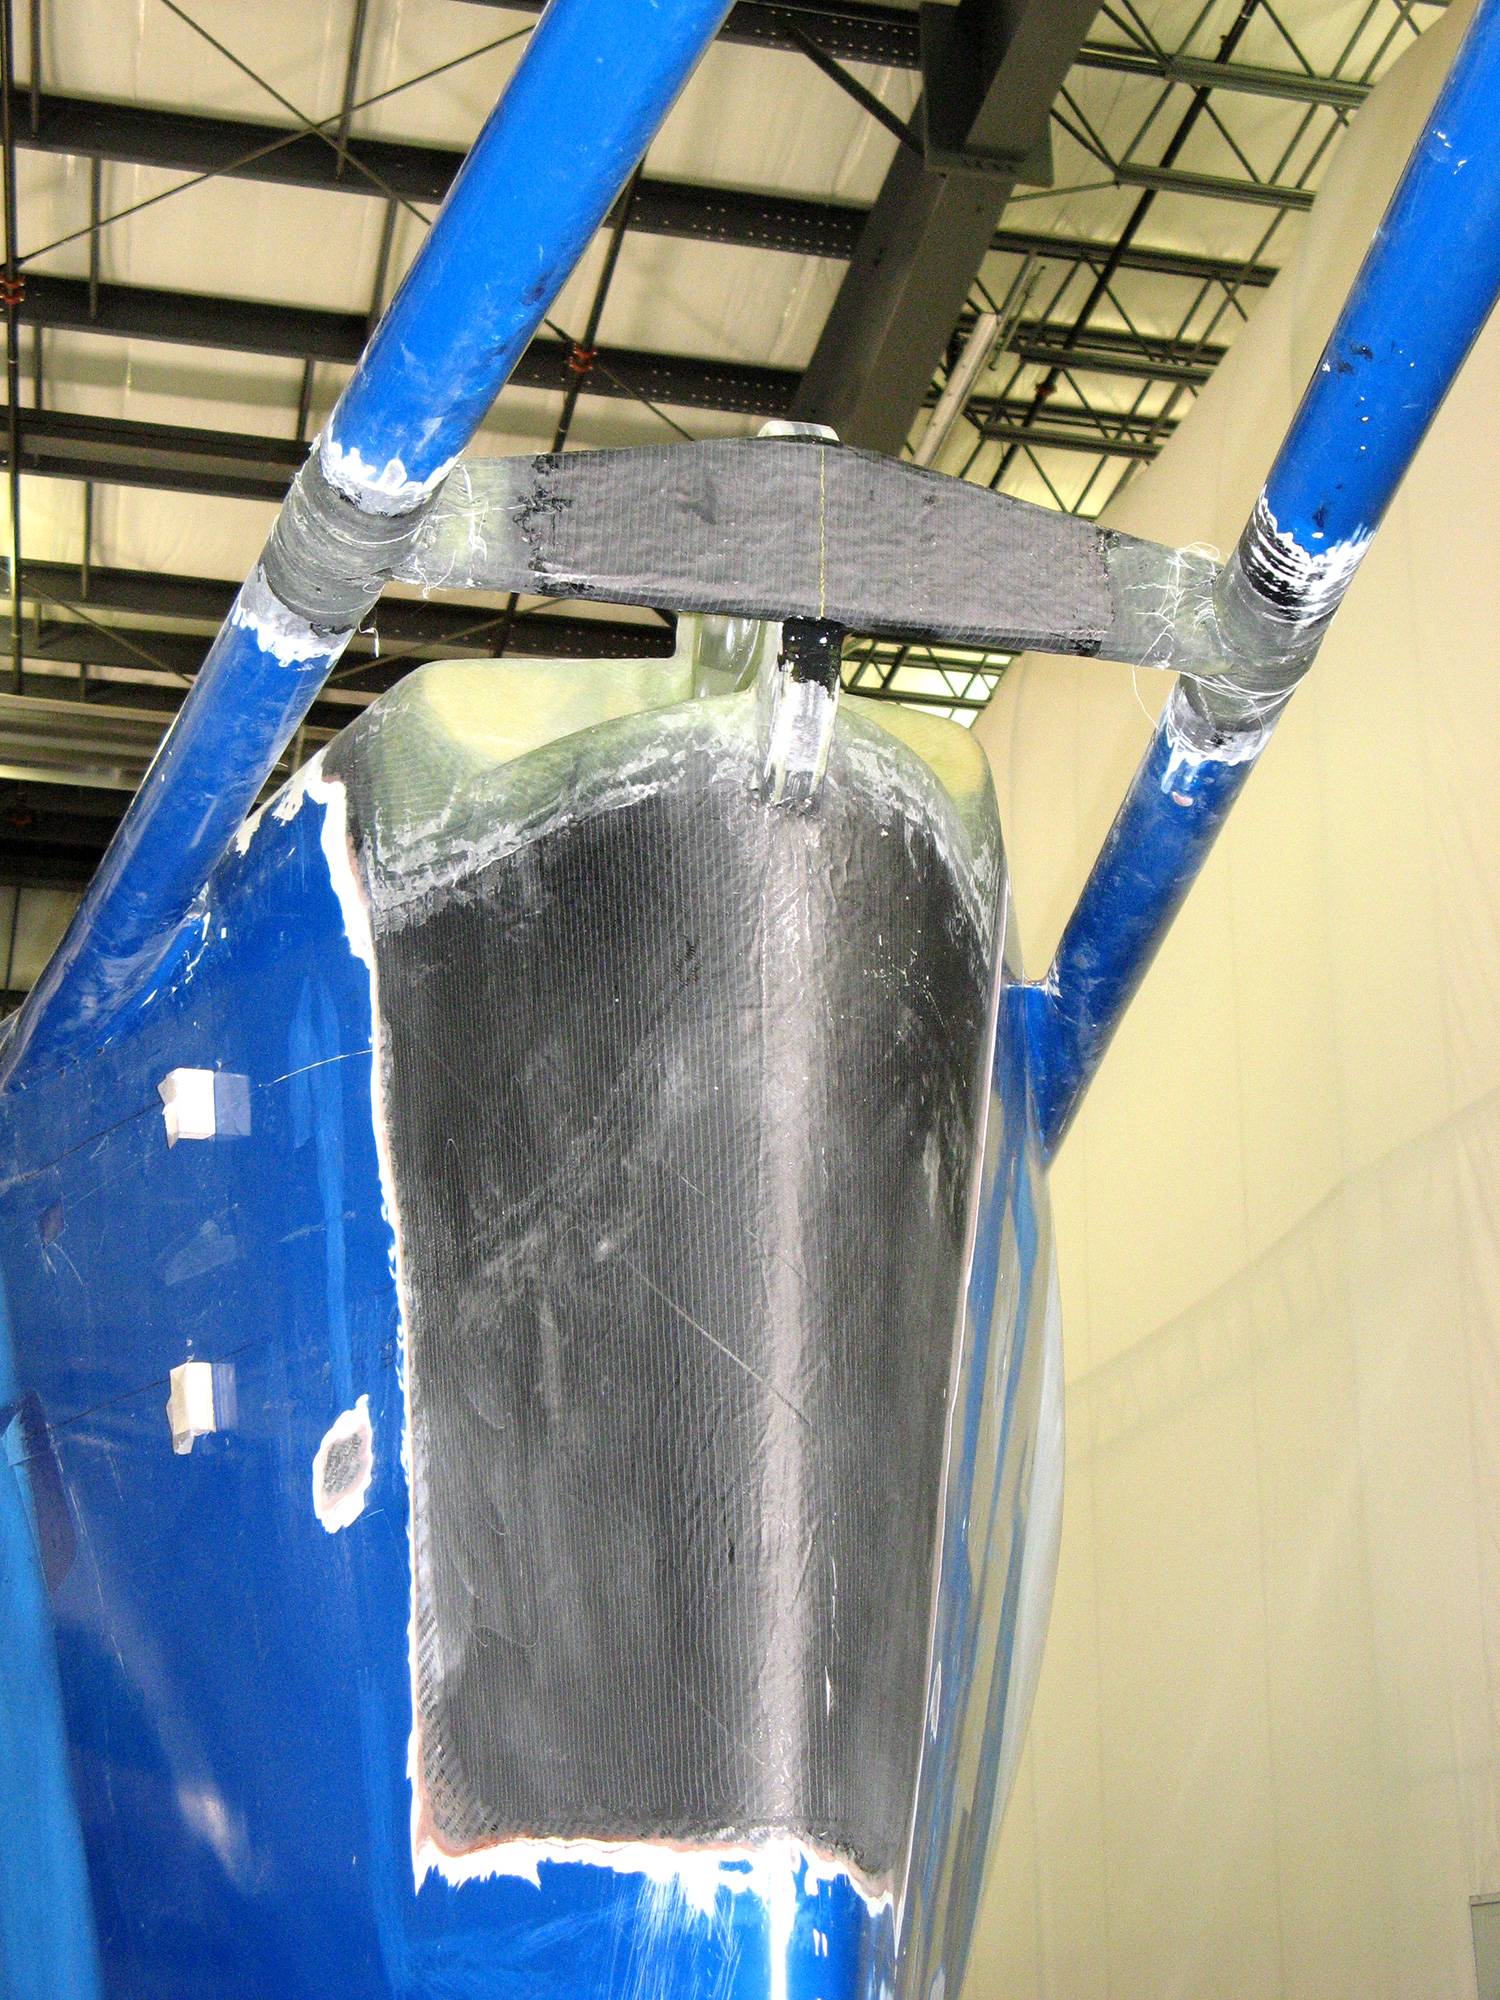  The repair required cutting away a section of 
            the bow to expose the solid carbon fiber centerline structure, repairing 
            and modifying the carbon fiber stem fitting, and then rebuilding, 
            fairing, and painting the